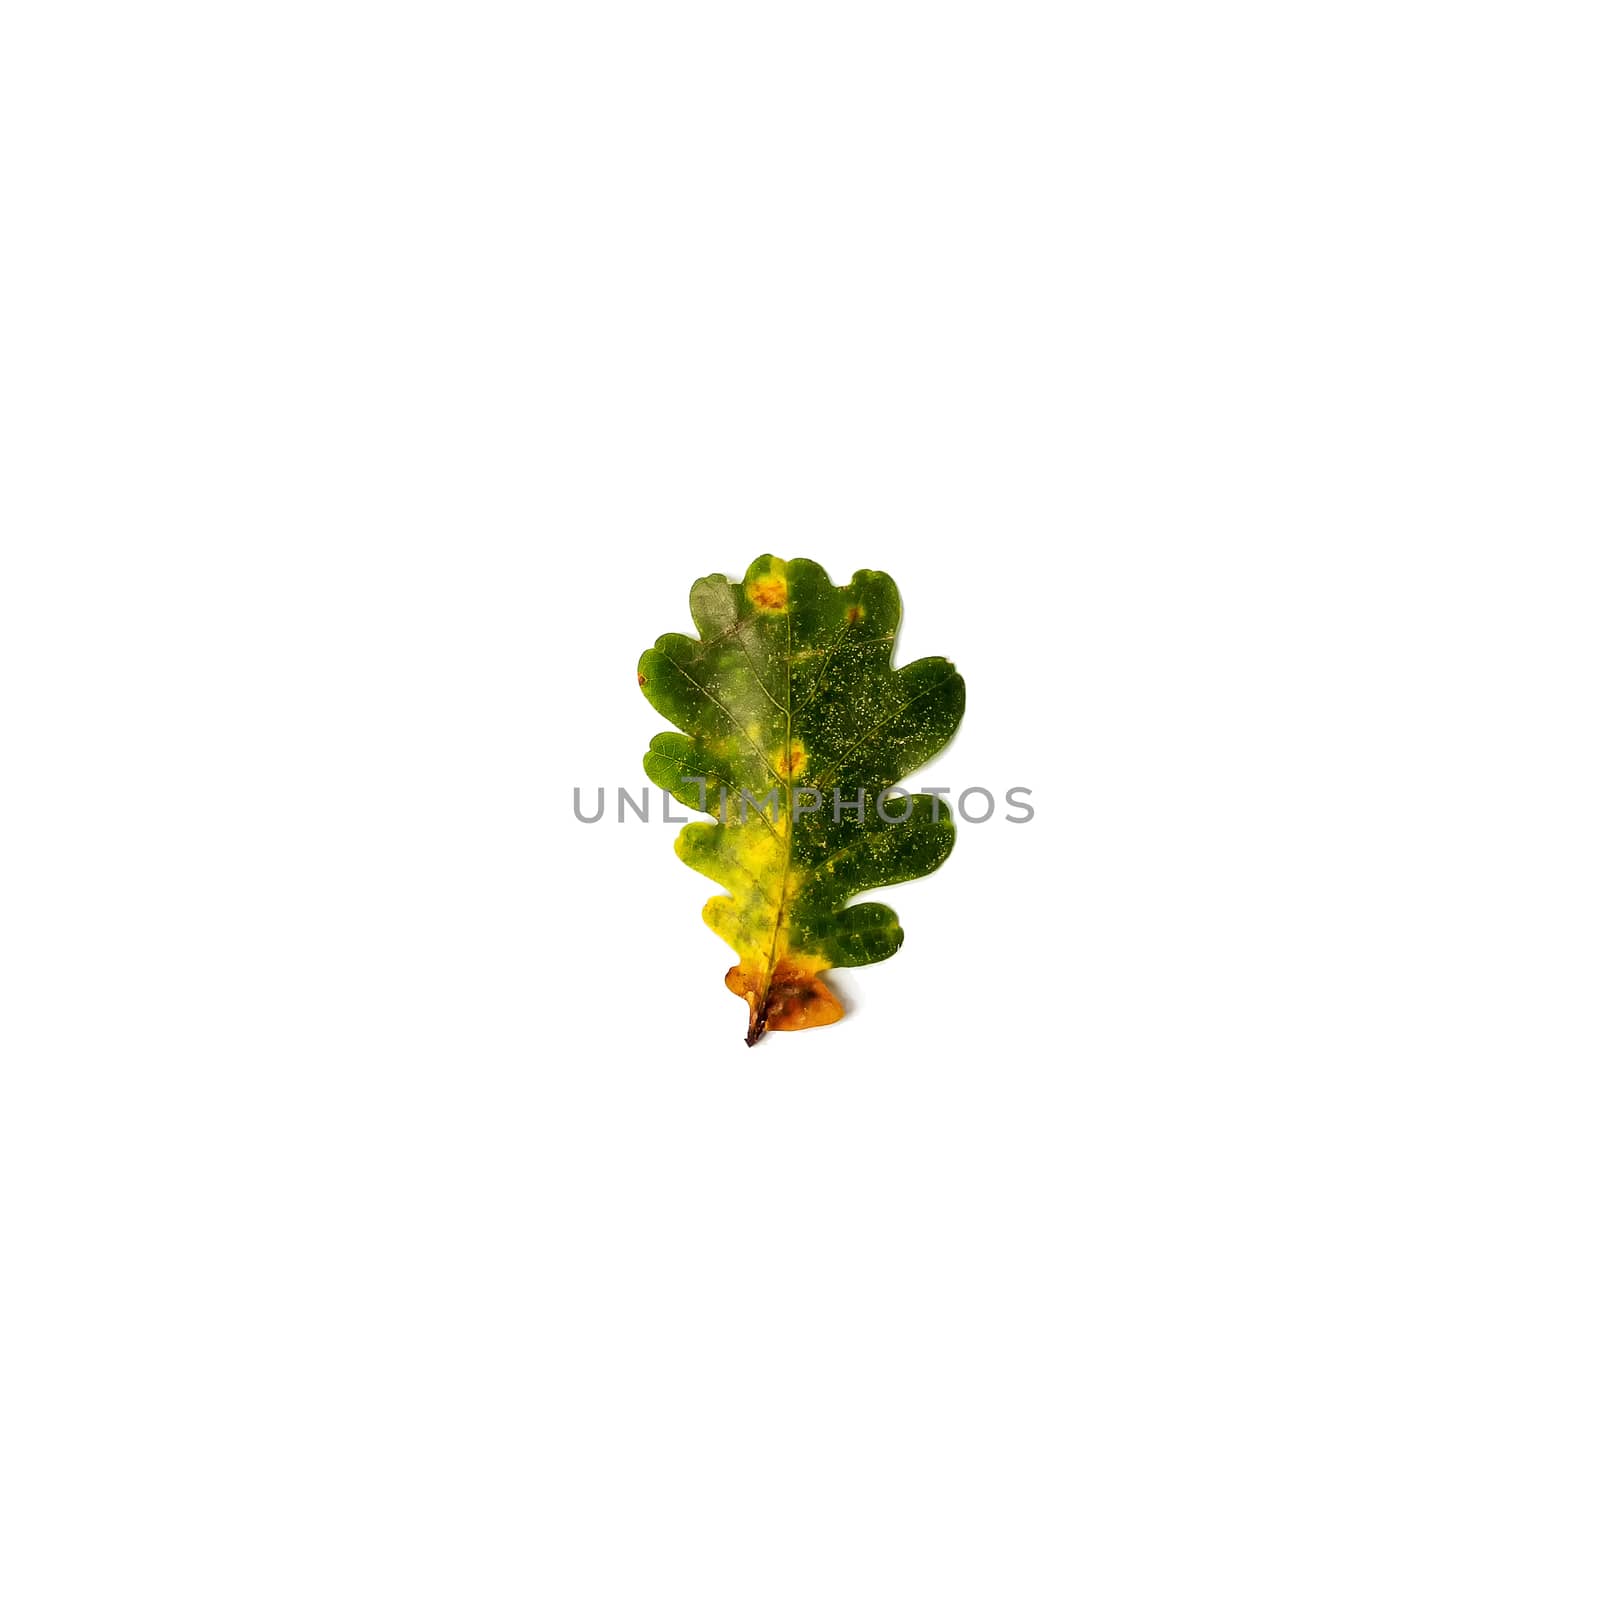 Green and yellow oak leaf isolated on a white background by JRPazos